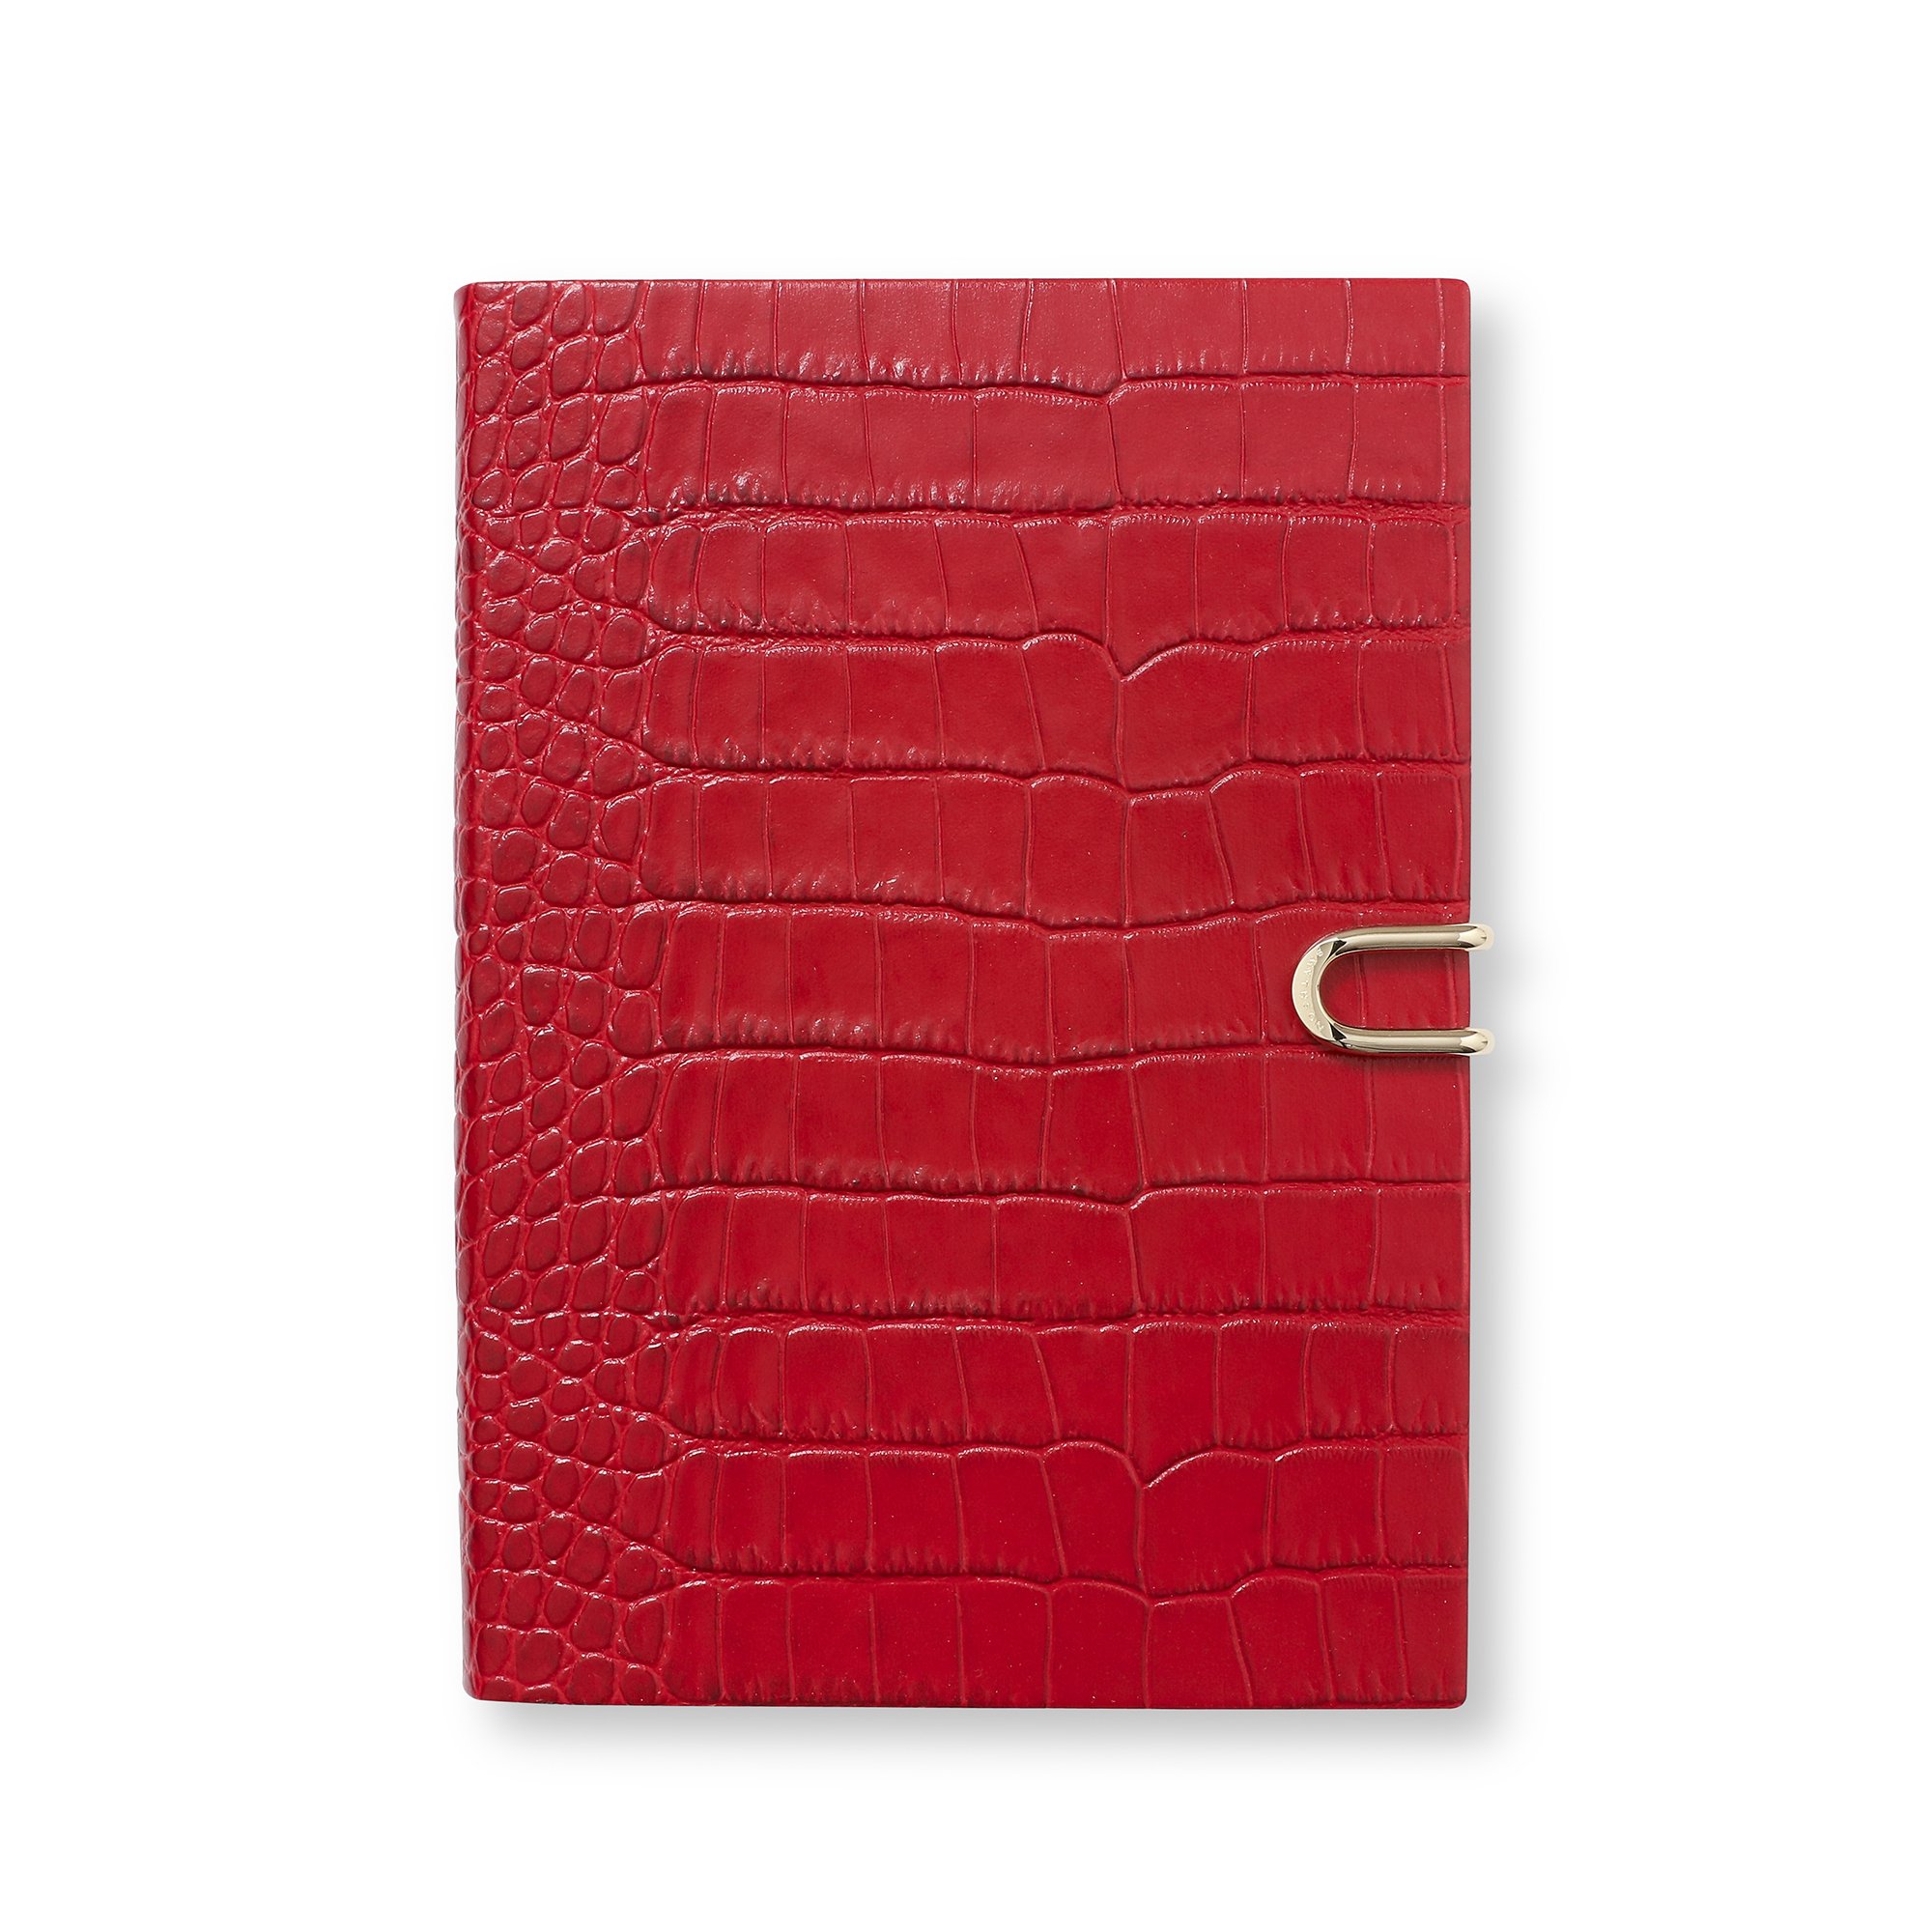 Smythson Soho Notebook With Slide Closure In Mara In Red